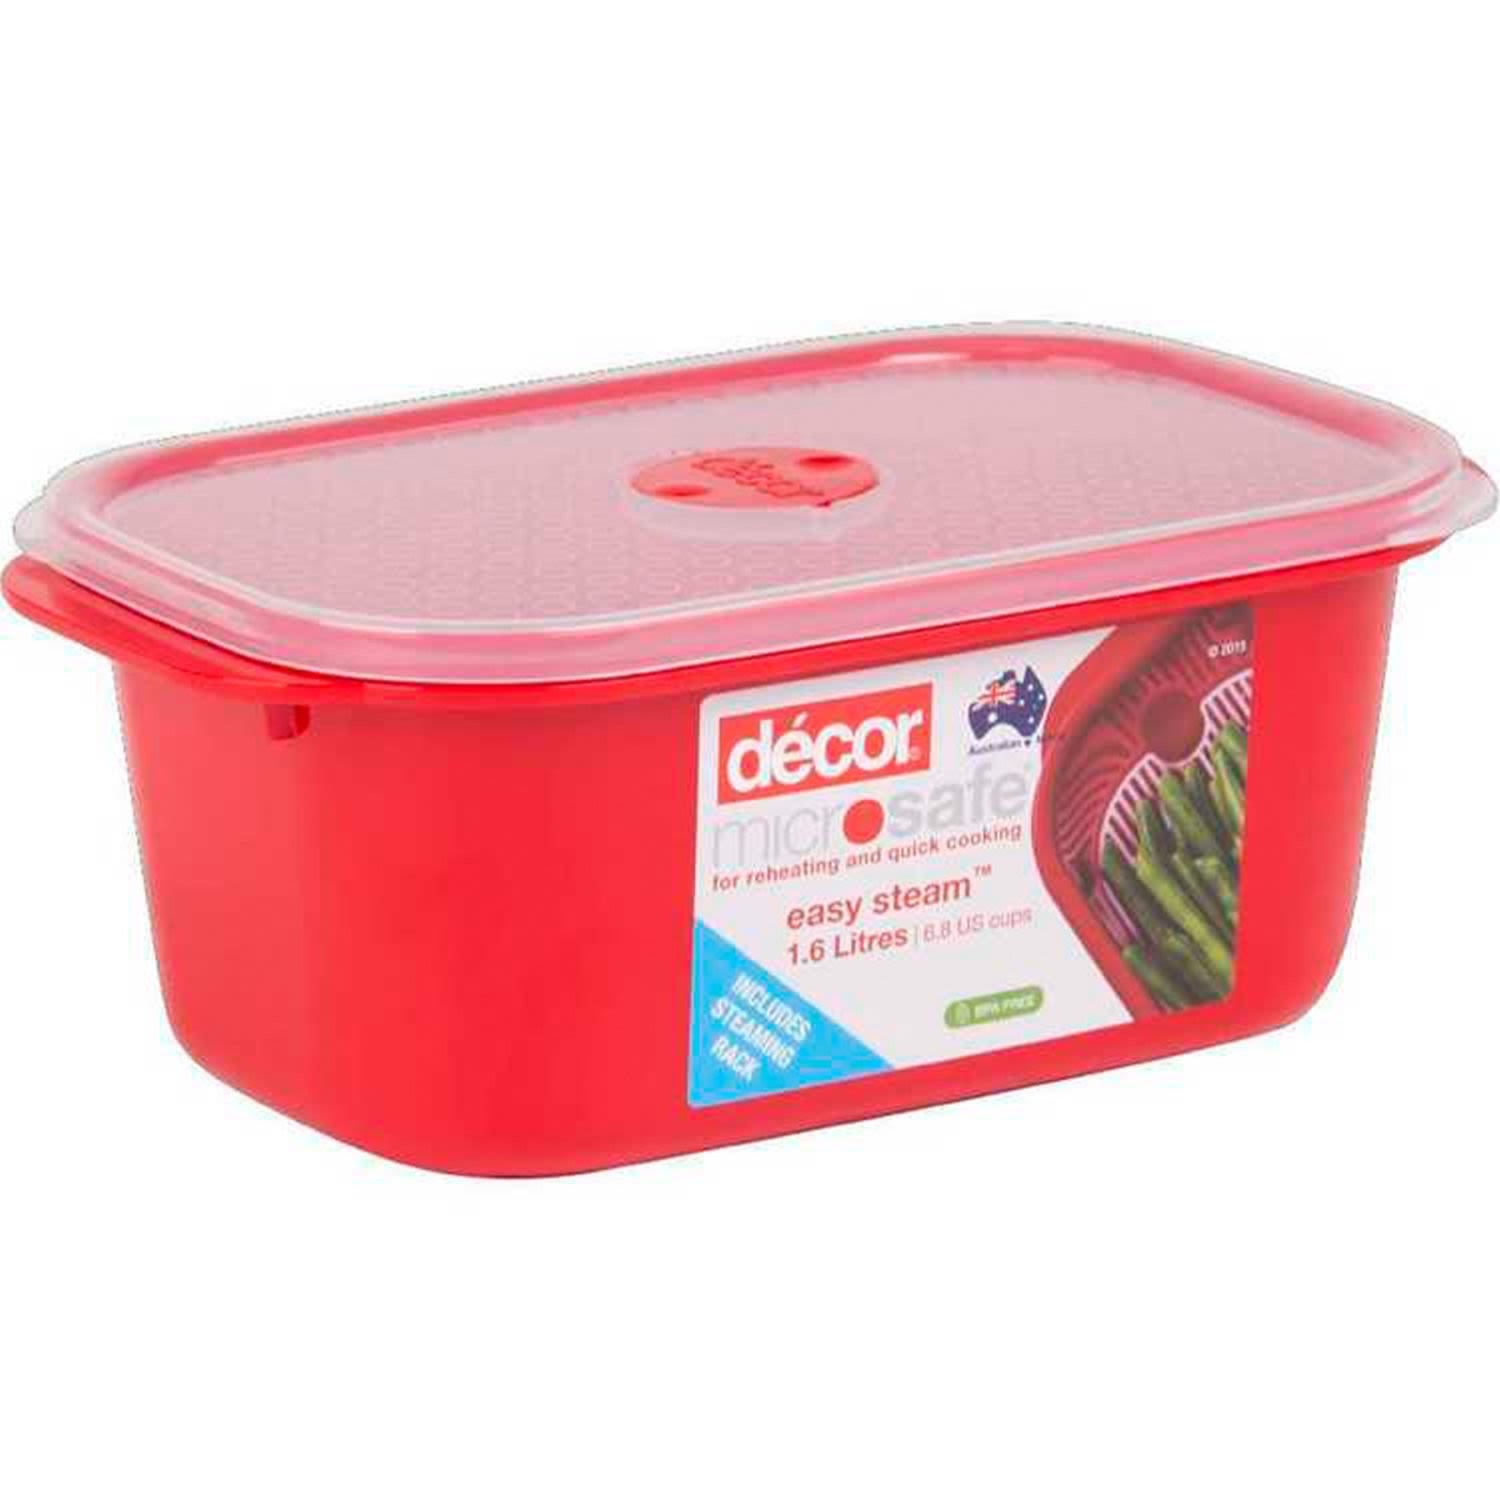 Decor Microsafe Oblong Container With Steaming Rack 1.6 L, 1 Each